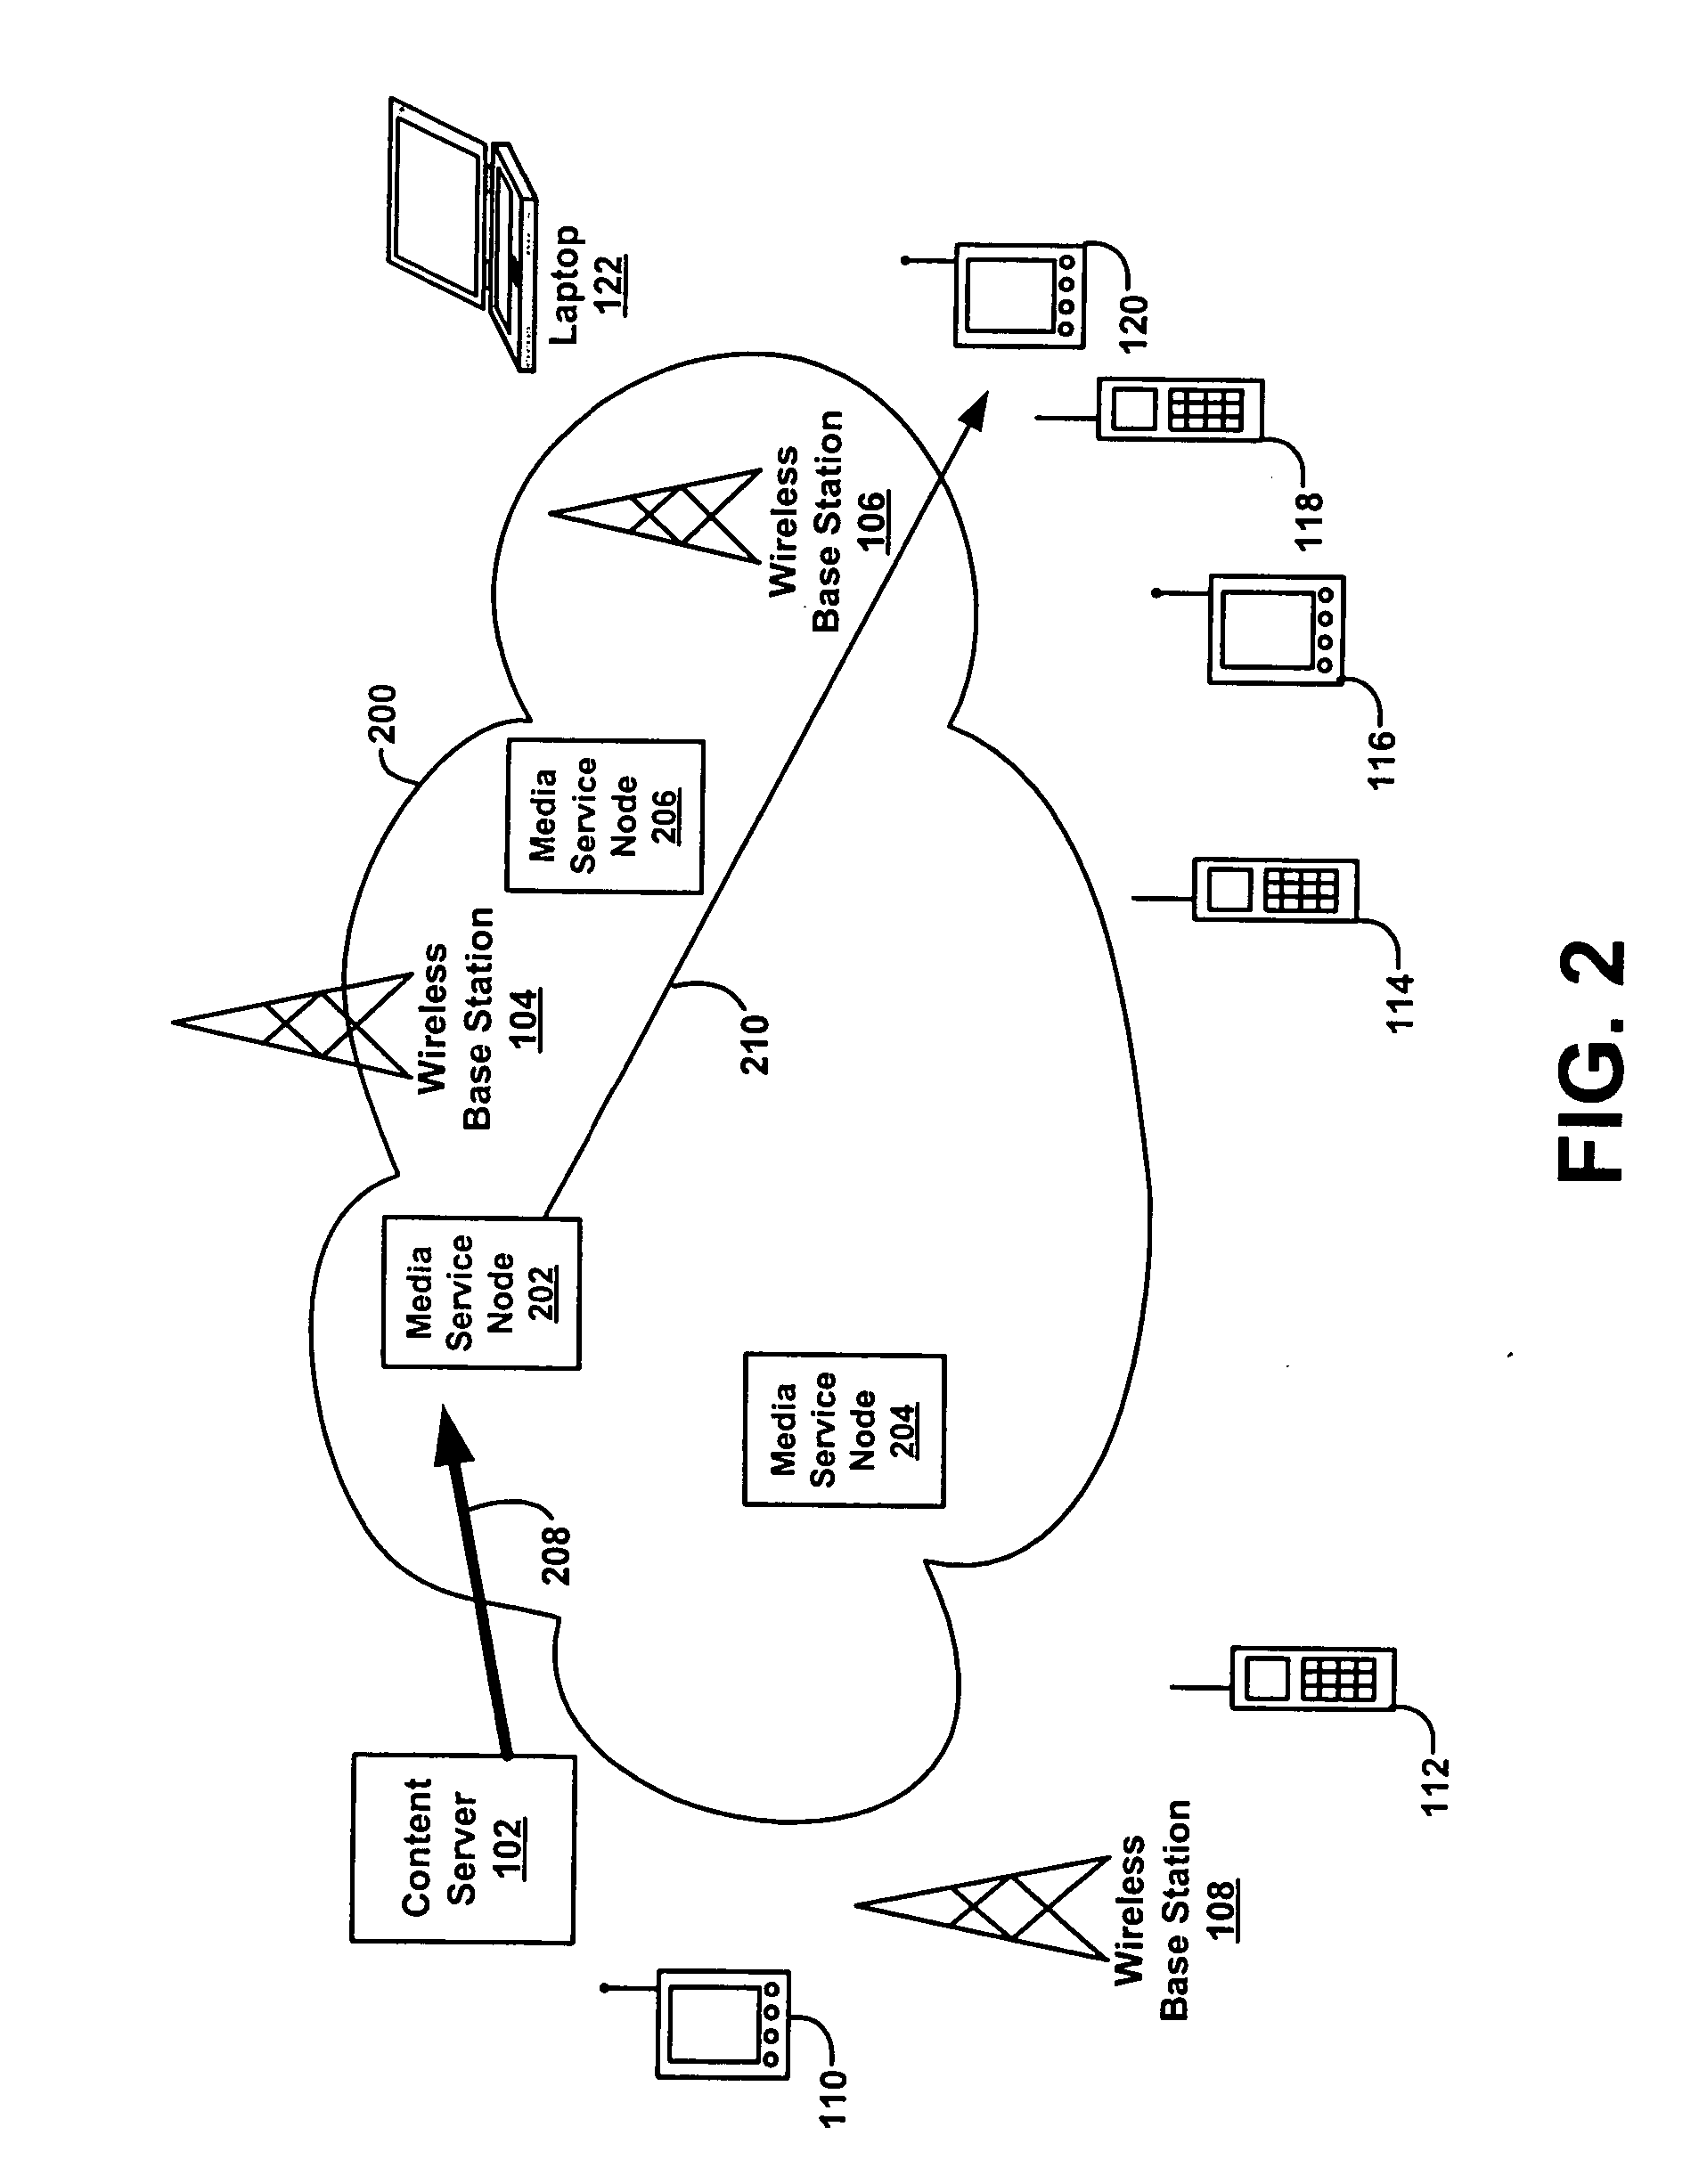 Method for managing a streaming media service